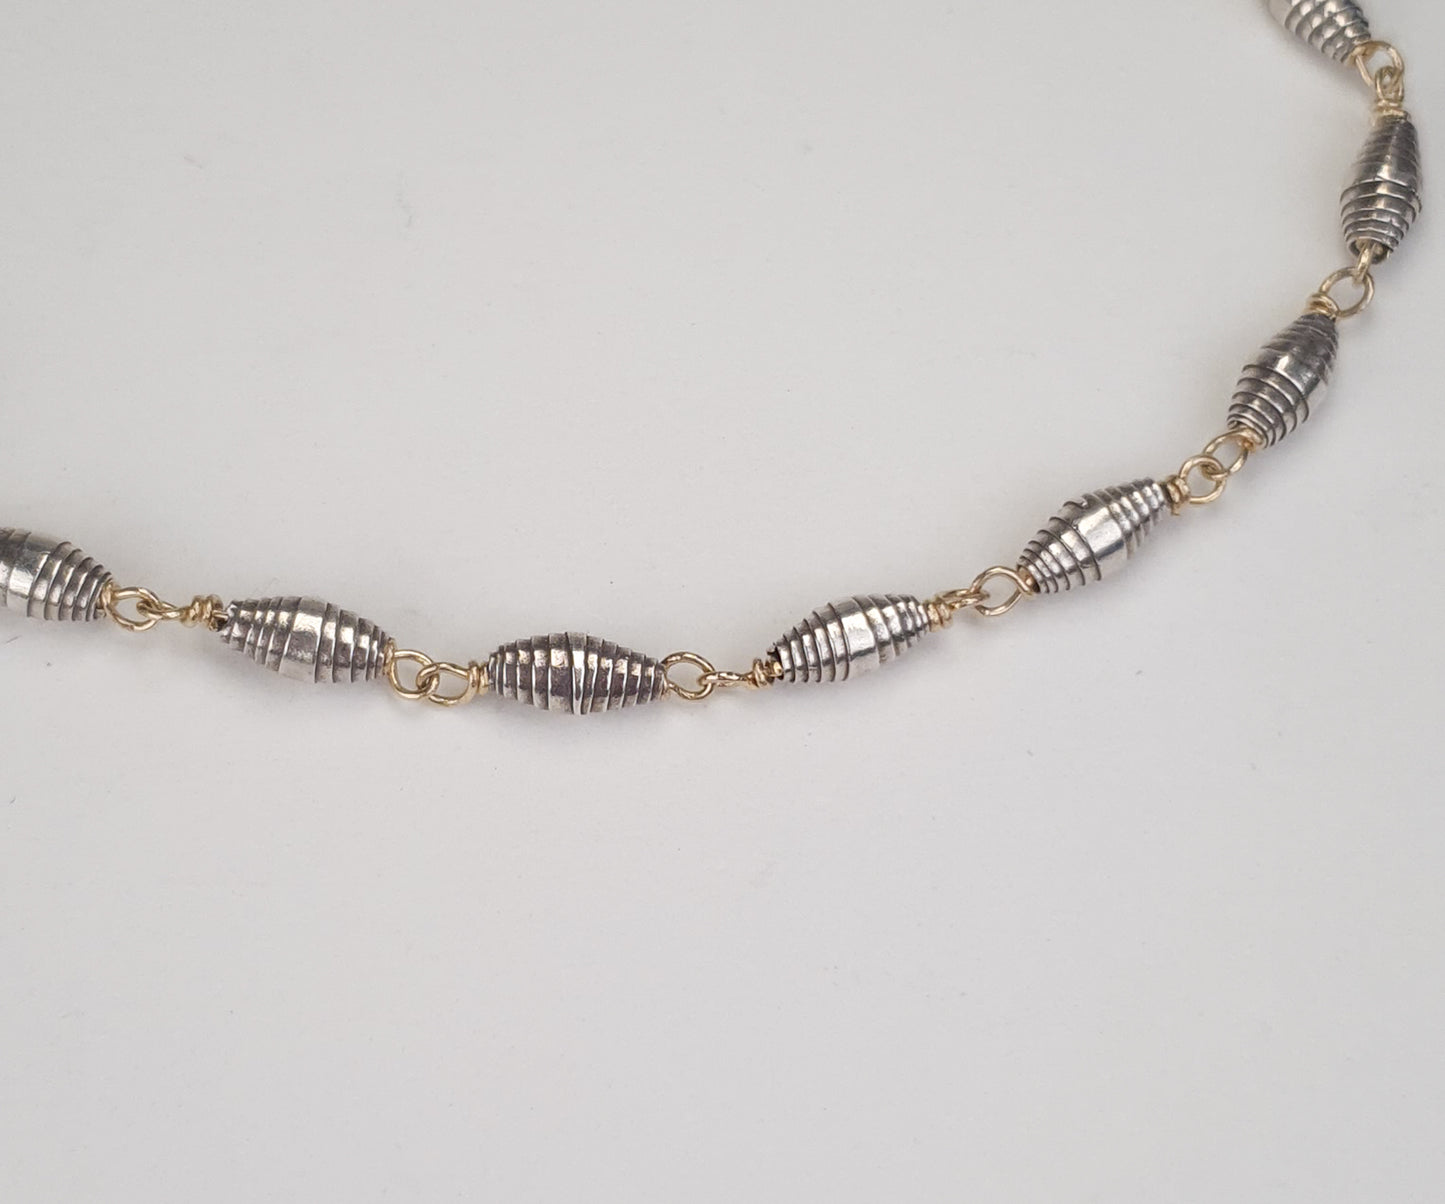 Vintage Silver Paper Beads and Gold Chain Bracelet